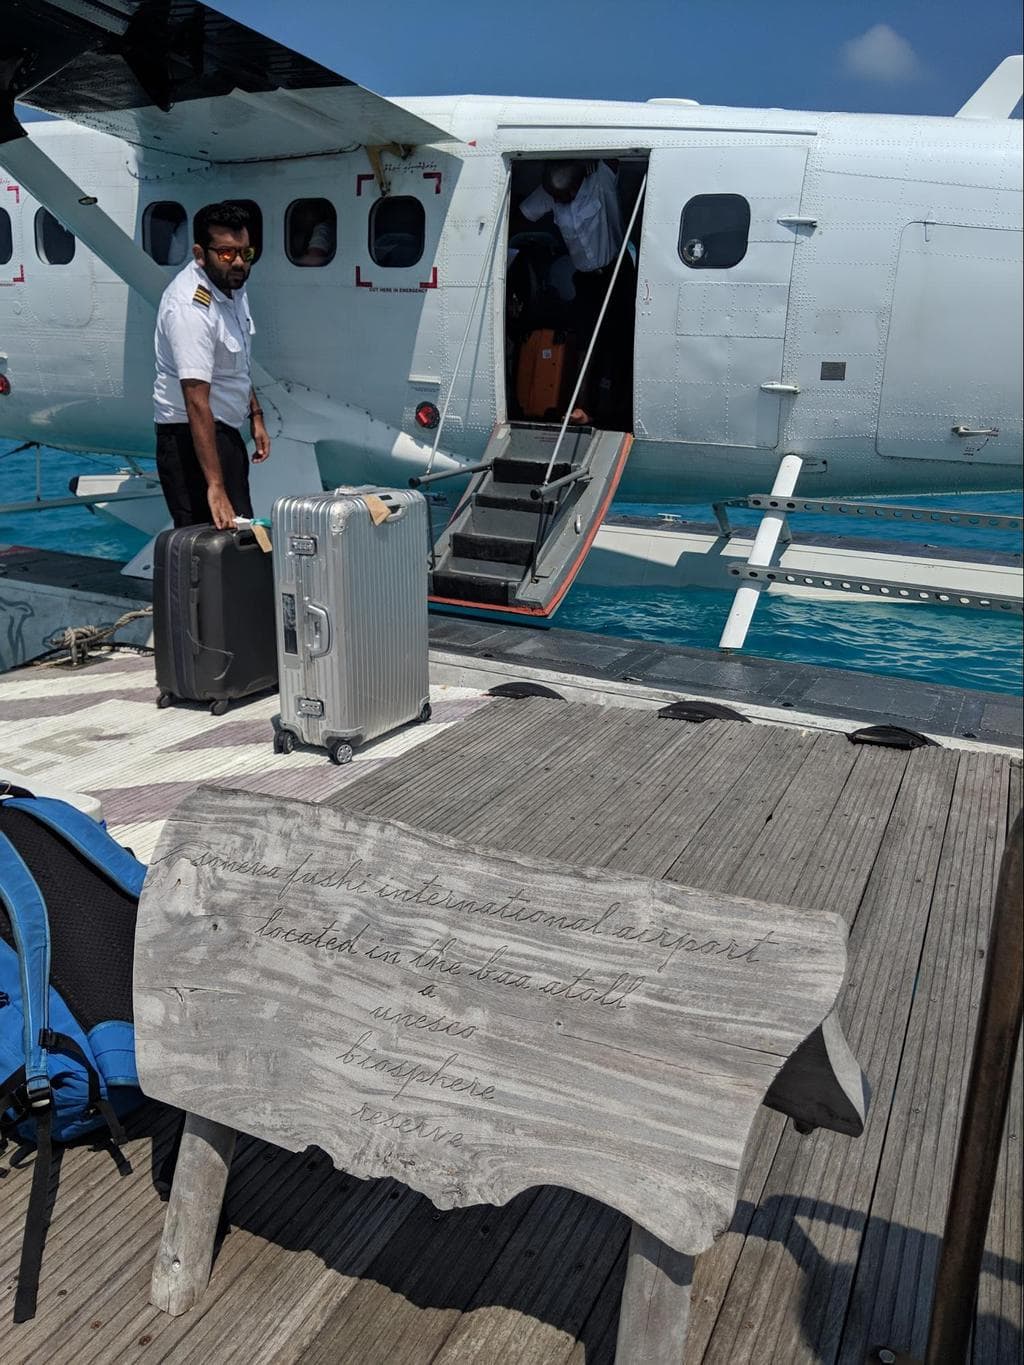 Bringing the luggage into the seaplane